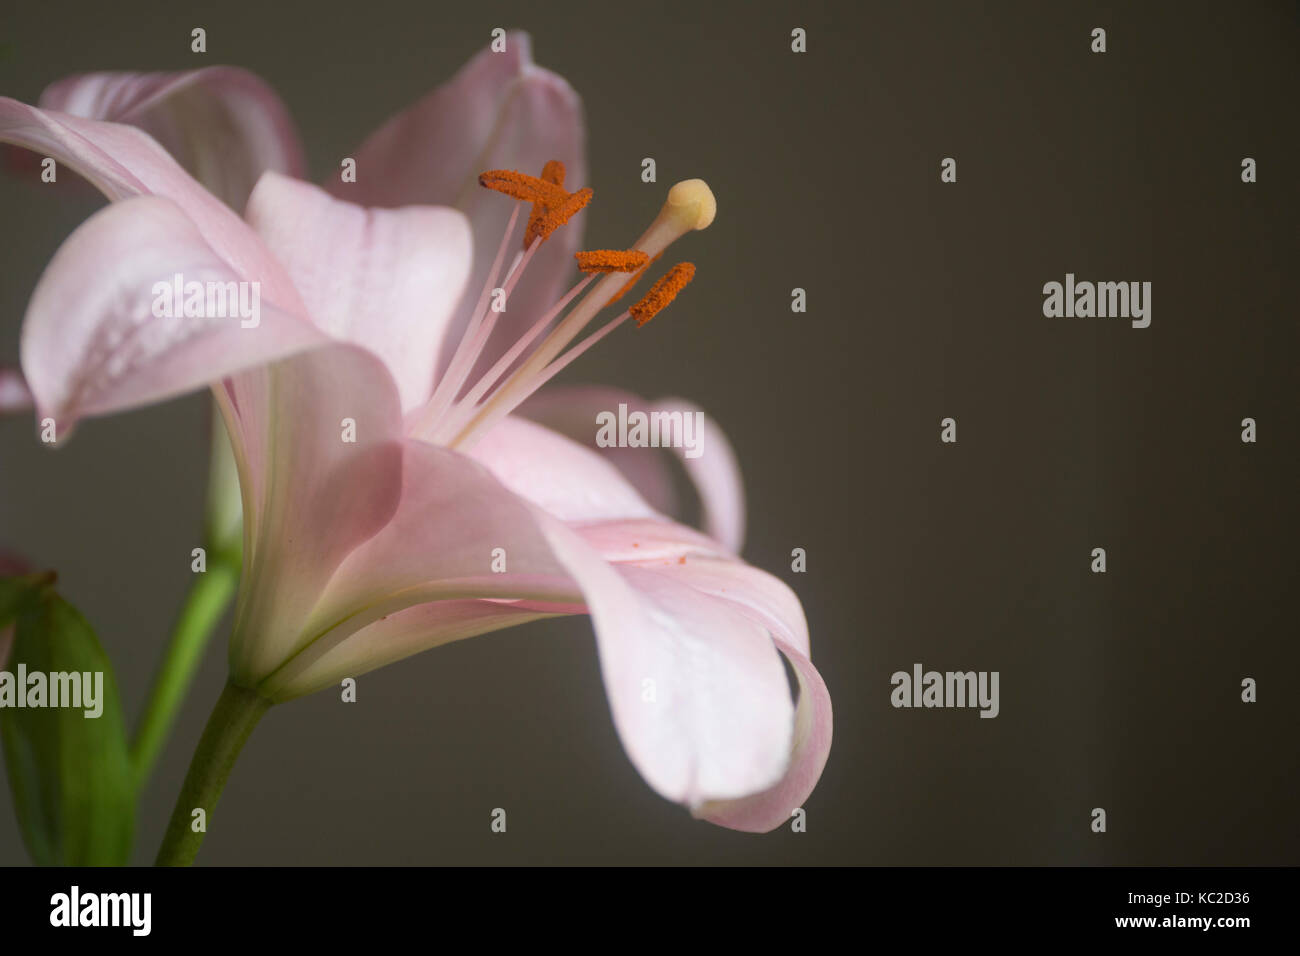 Pink lilium or lily flower on a dark background Stock Photo